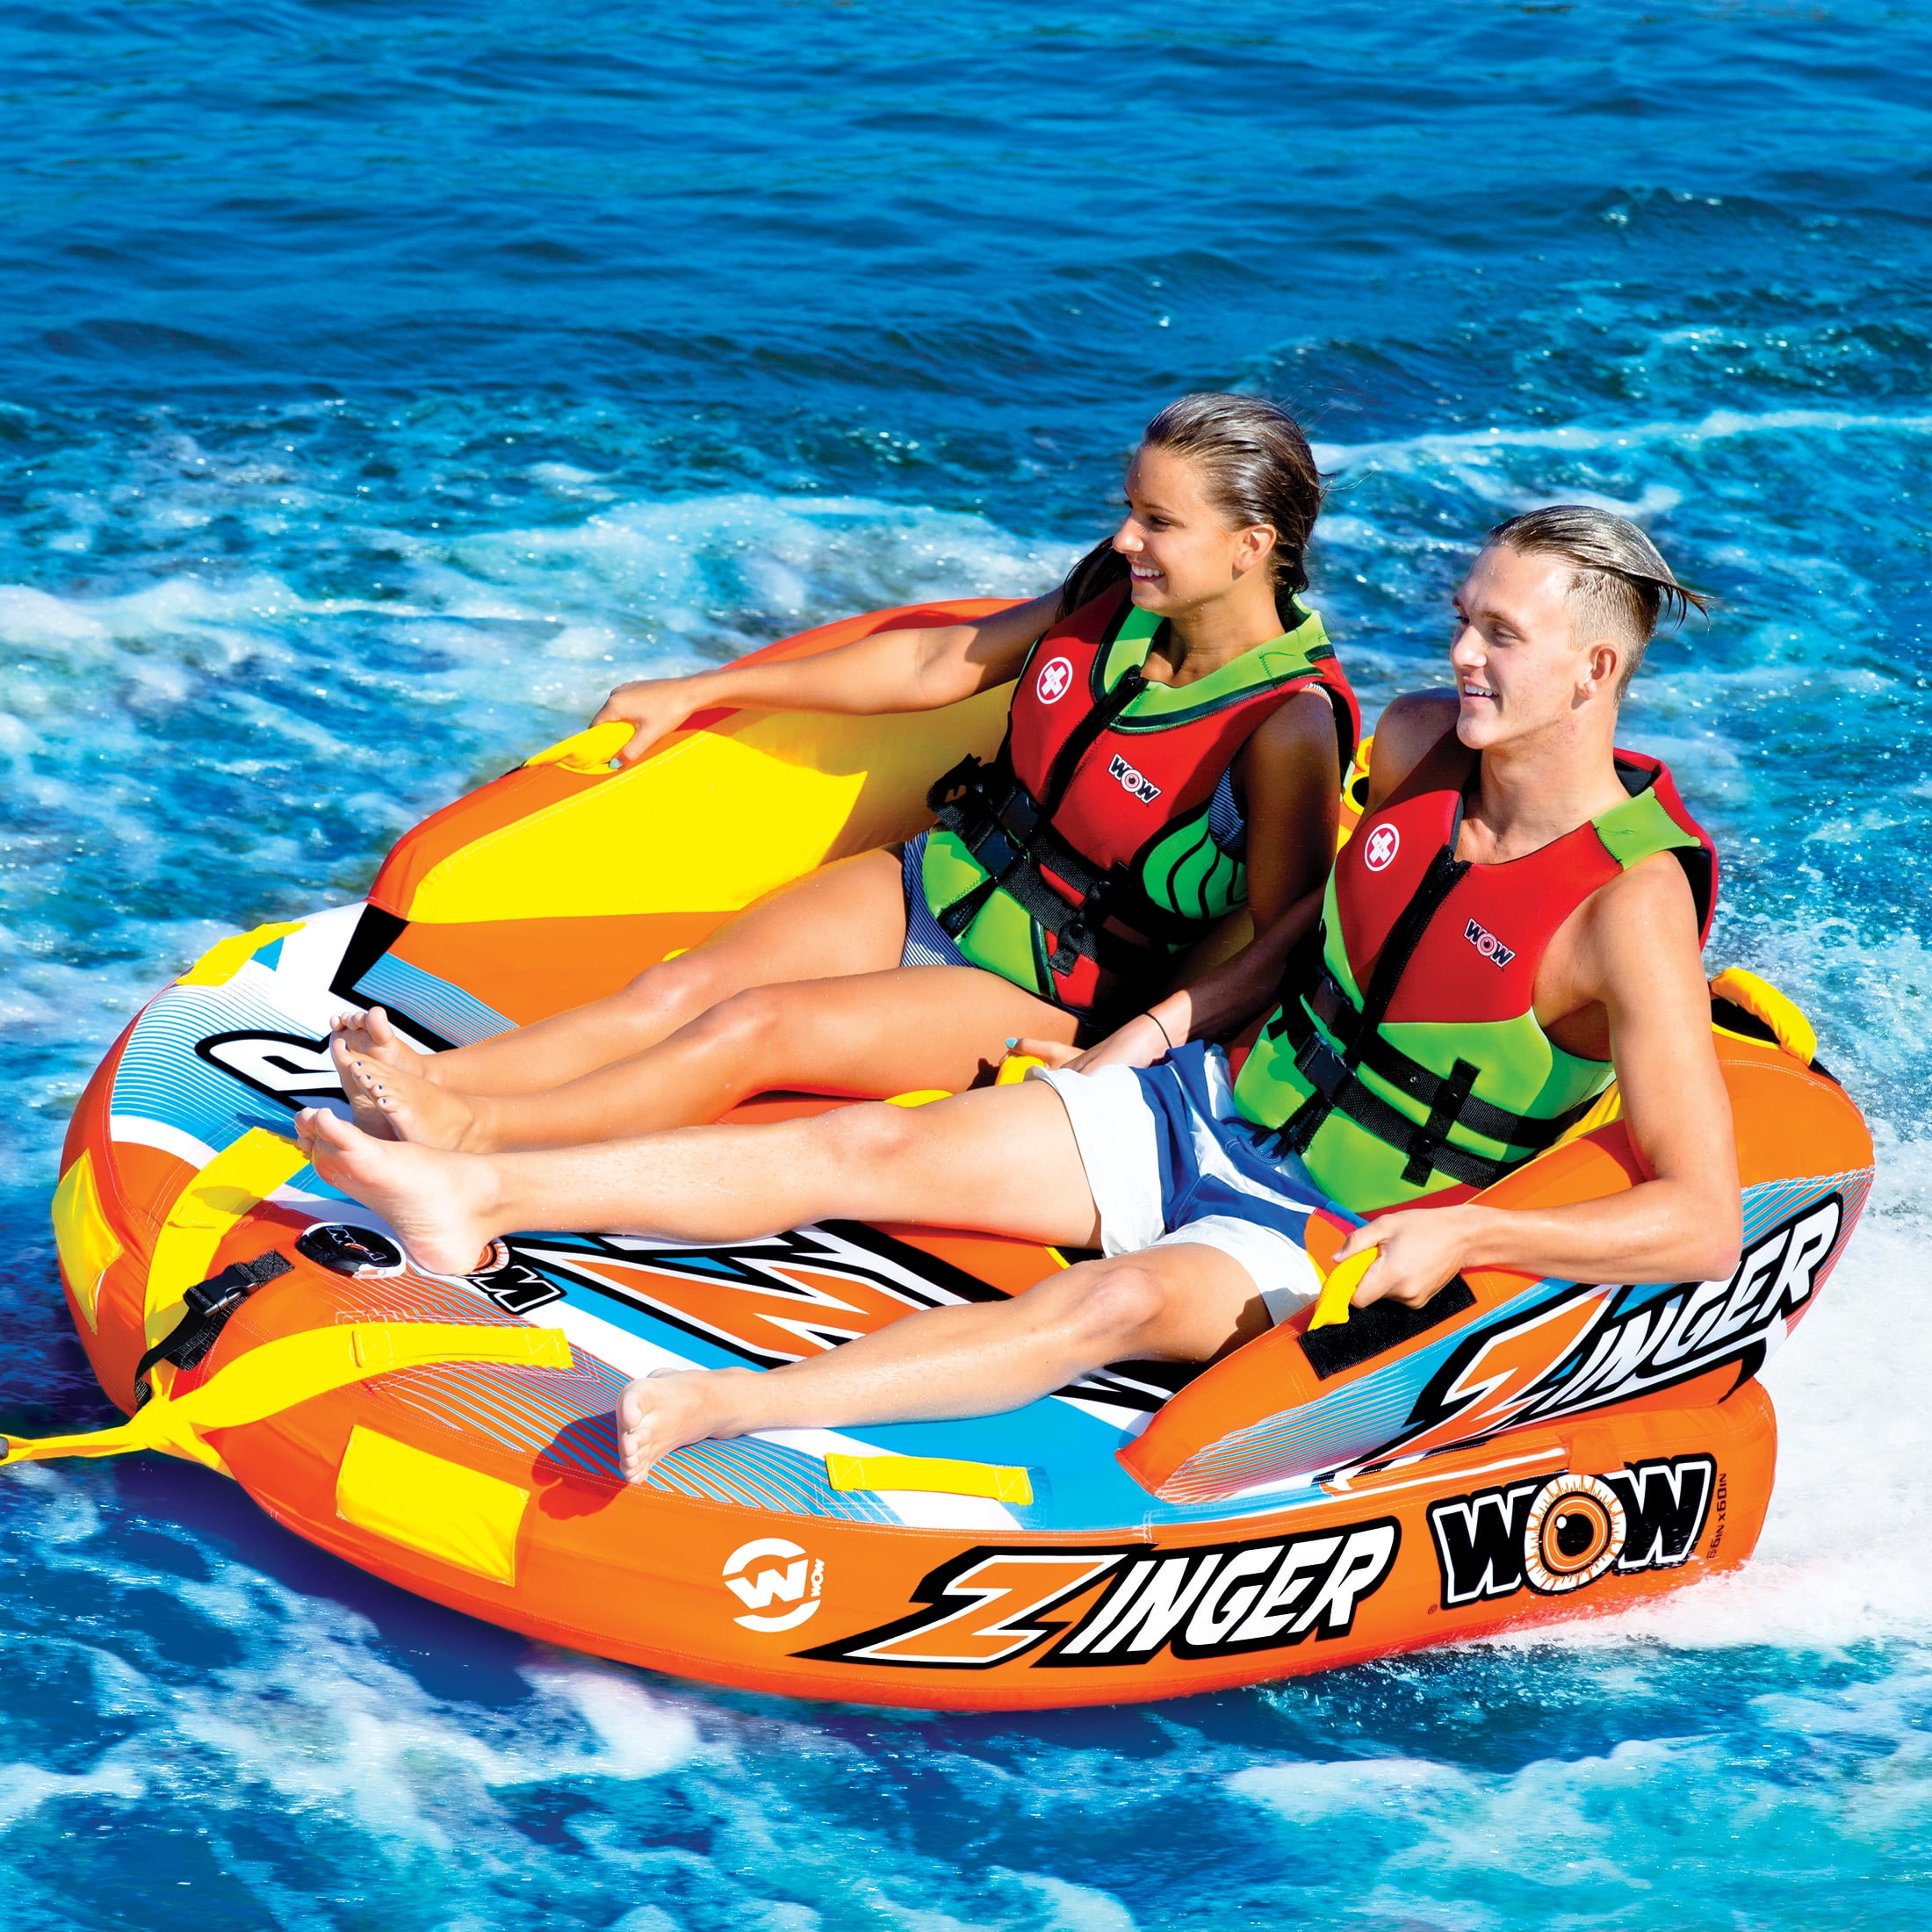 Wow World of Watersports Zinger 2 Person Towable